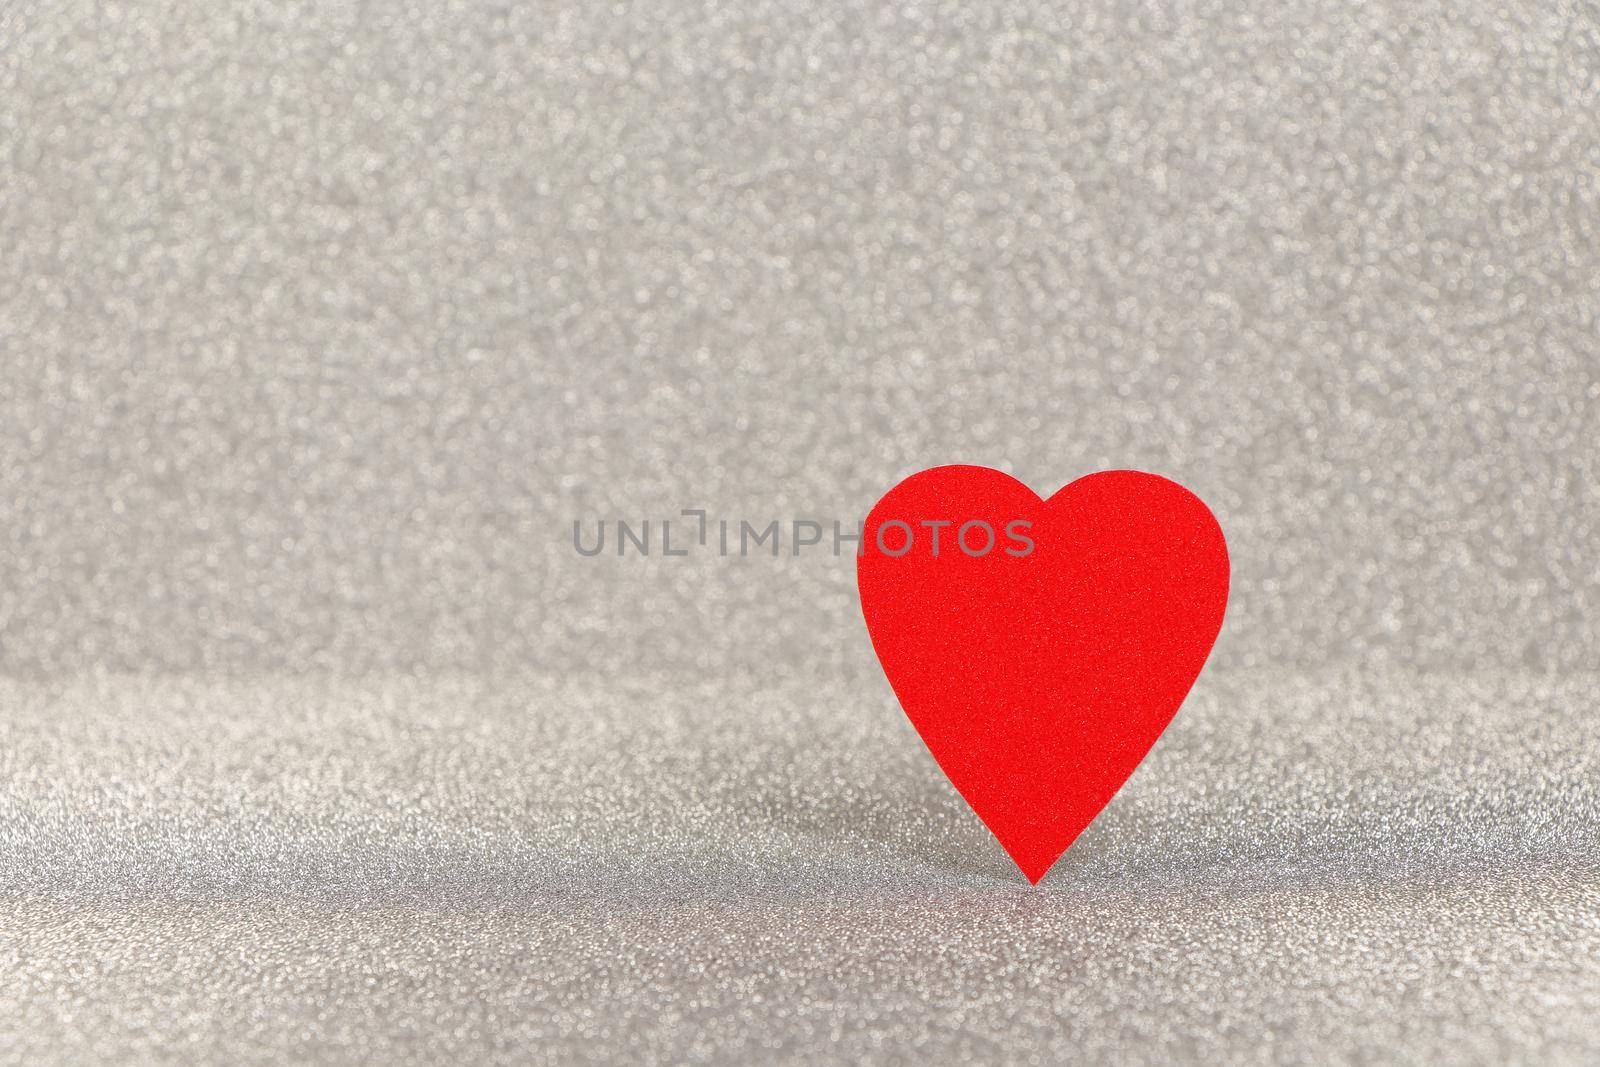 Saint Valentine's day vibrant red heart standing on bright textured silver